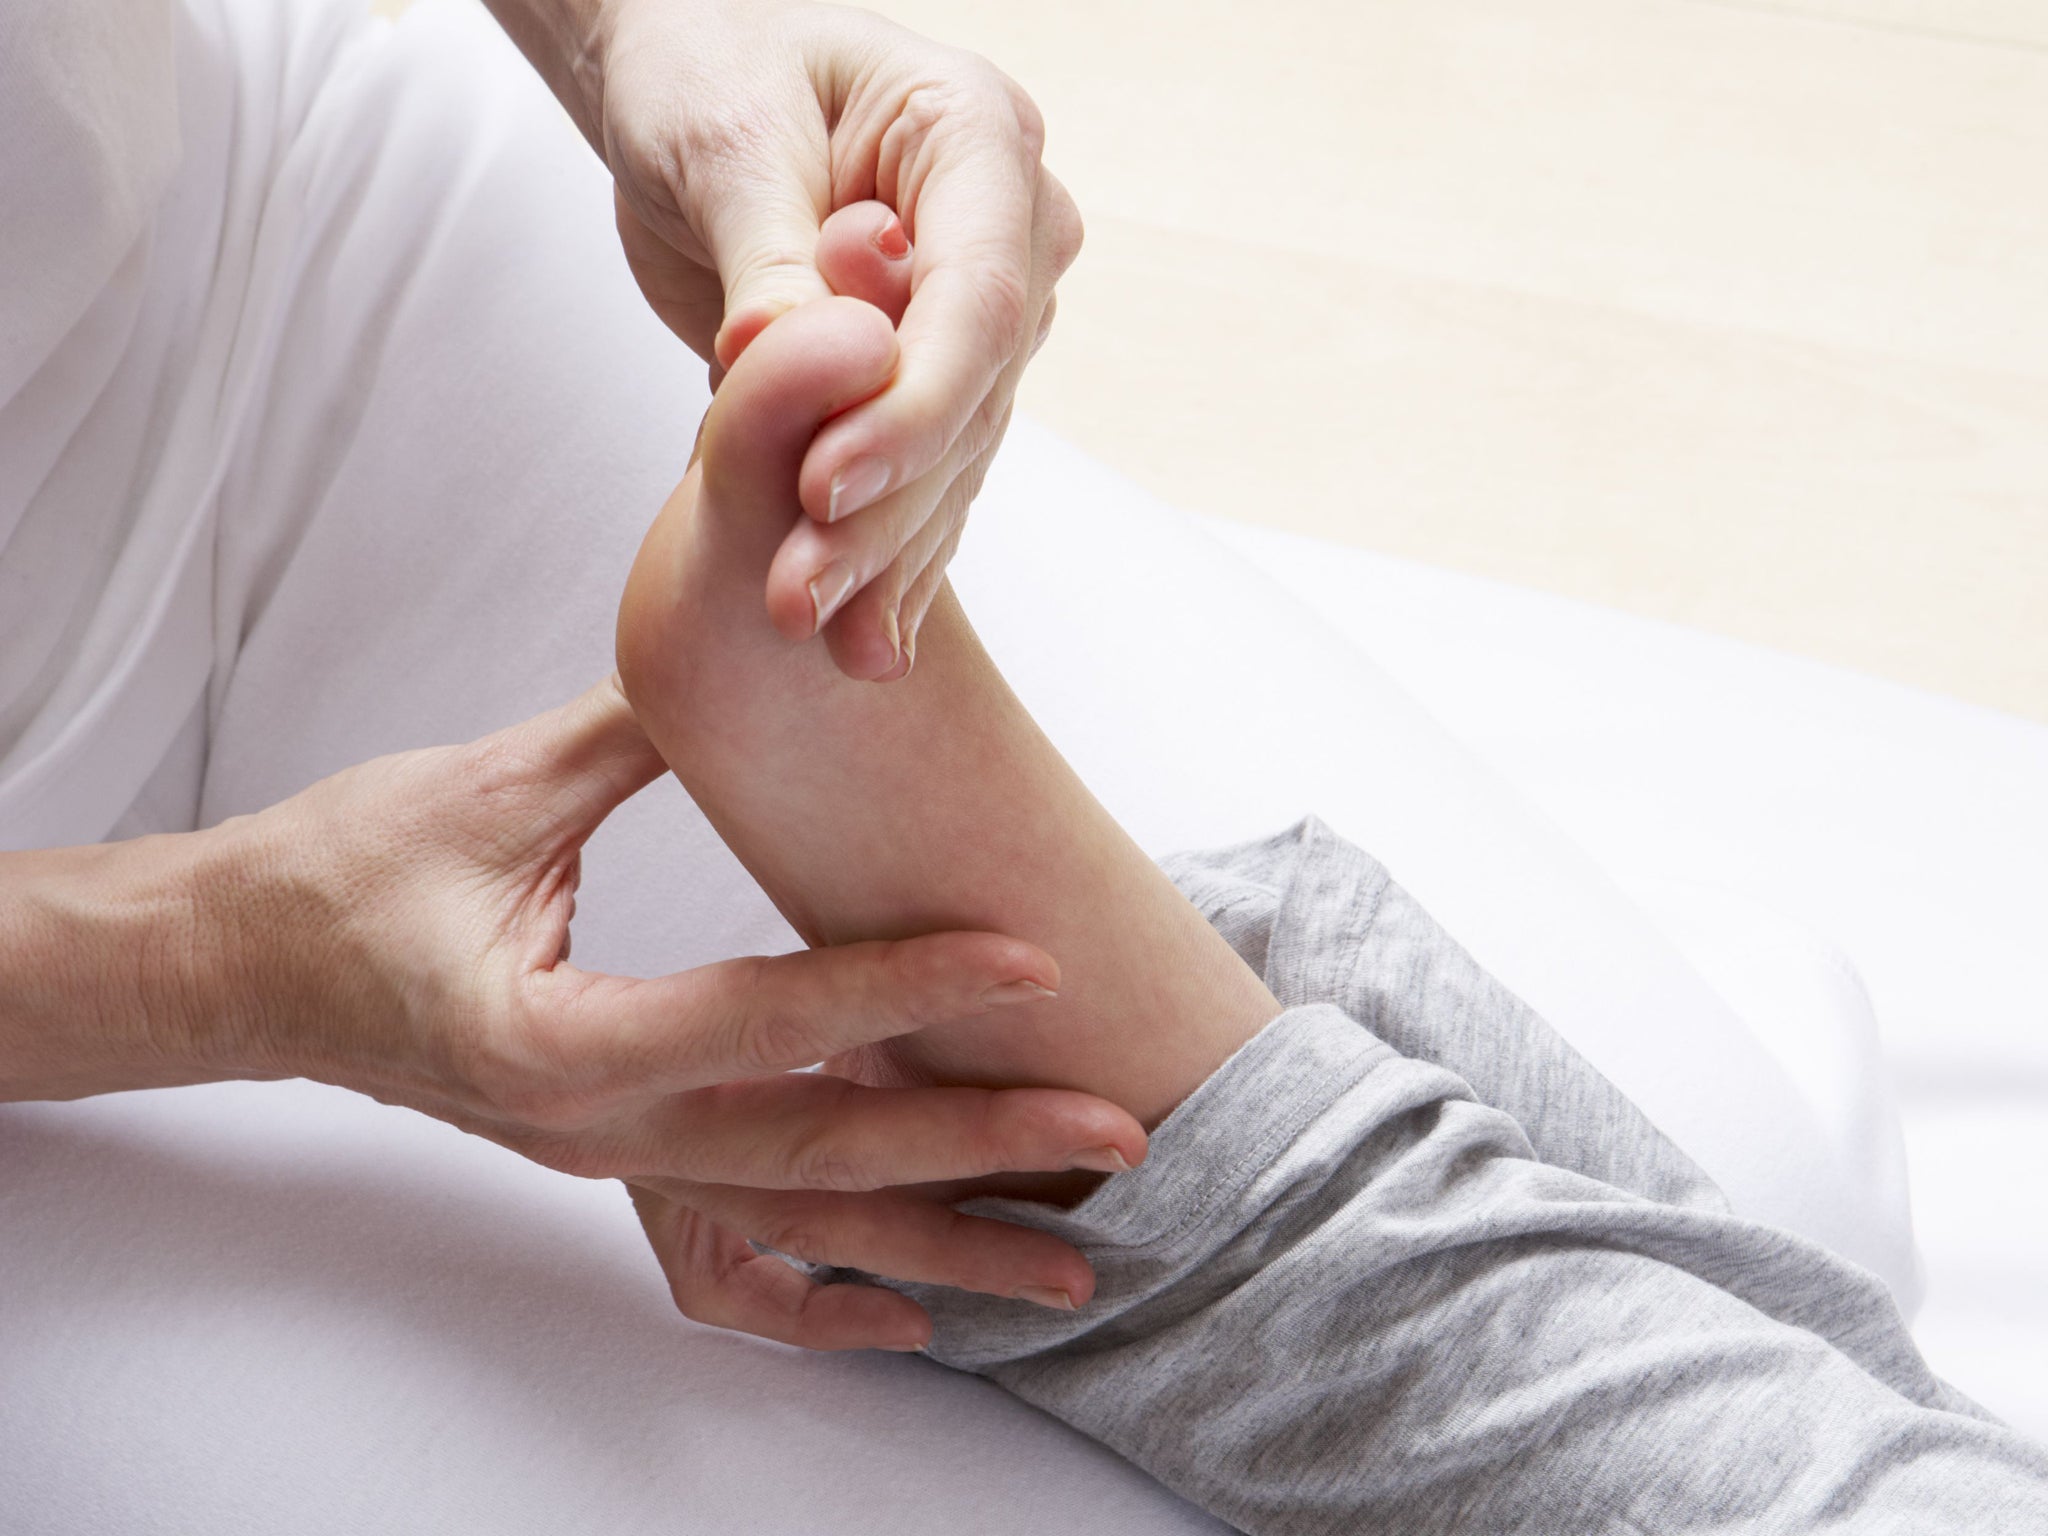 Reflexology may be as effective as painkillers, according to researchers at the University of Portsmouth